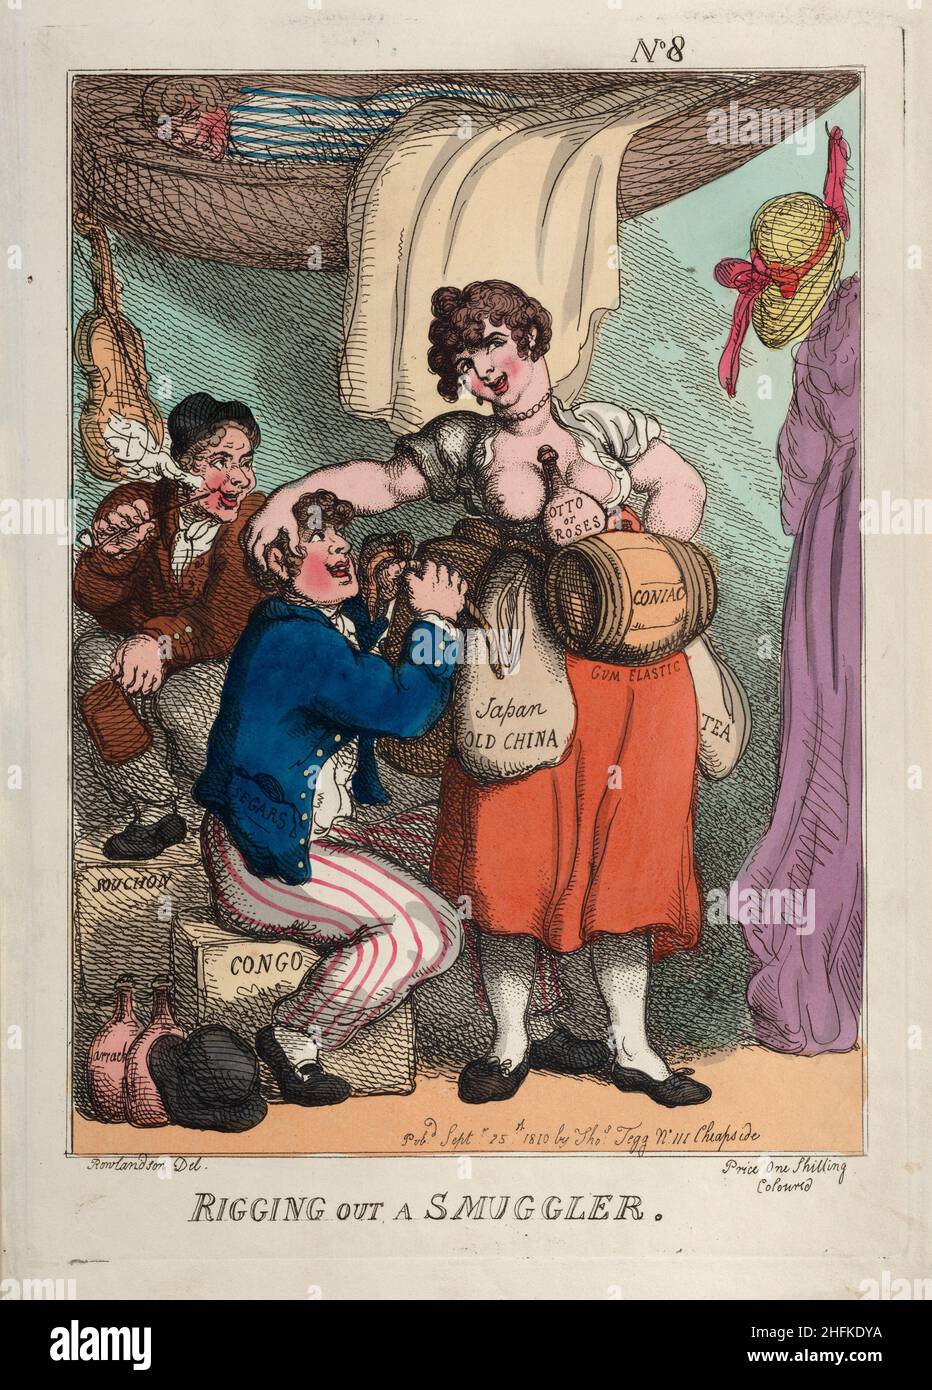 Rigging out a Smuggler. Artist: Thomas Rowlandson (1756-1827) an English artist and caricaturist of the Georgian Era. A social observer, he was a prolific artist and print maker.  Credit: Thomas Rowlandson/Alamy Stock Photo